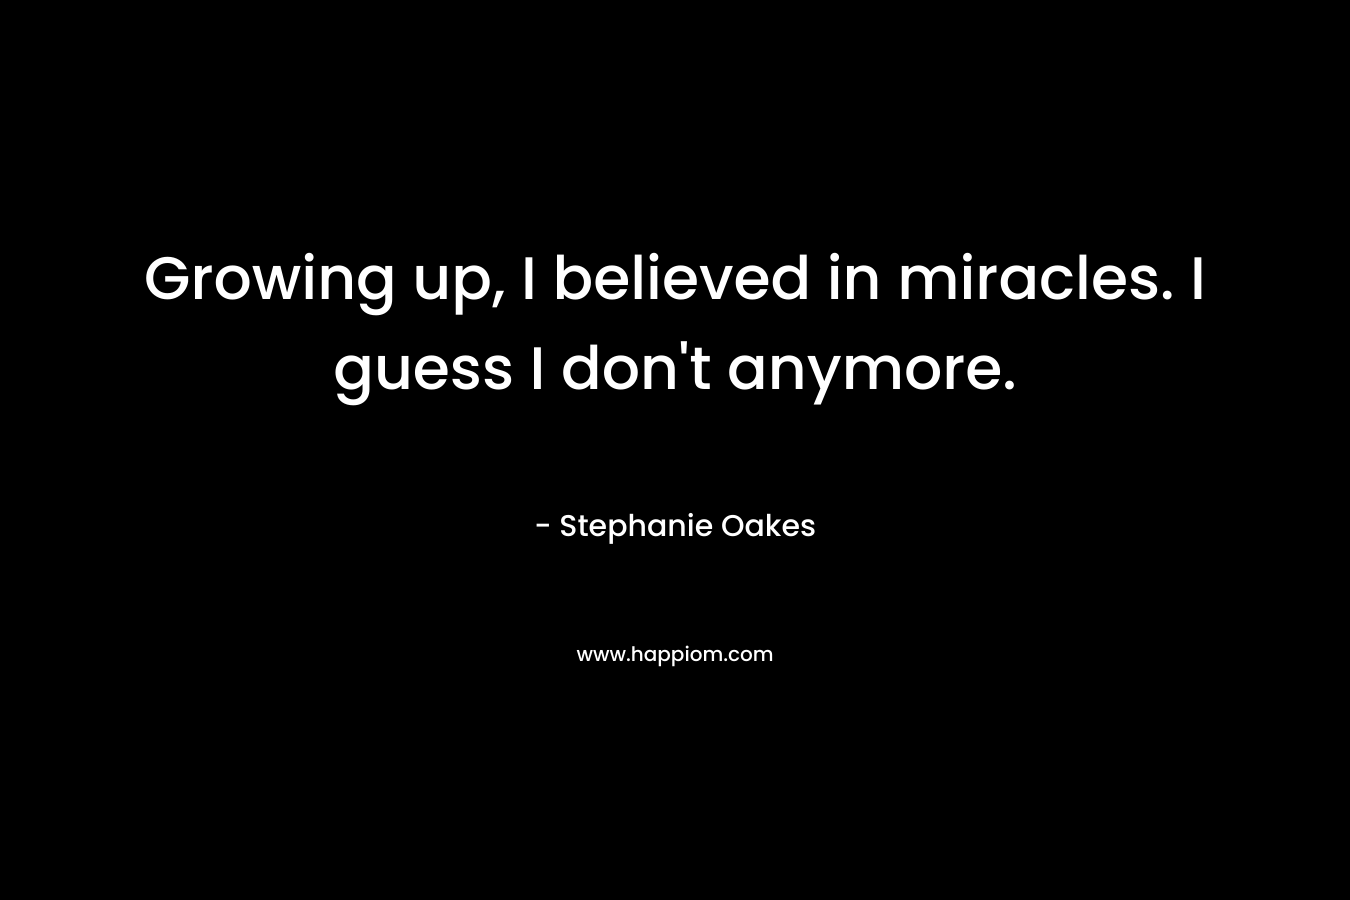 Growing up, I believed in miracles. I guess I don't anymore.